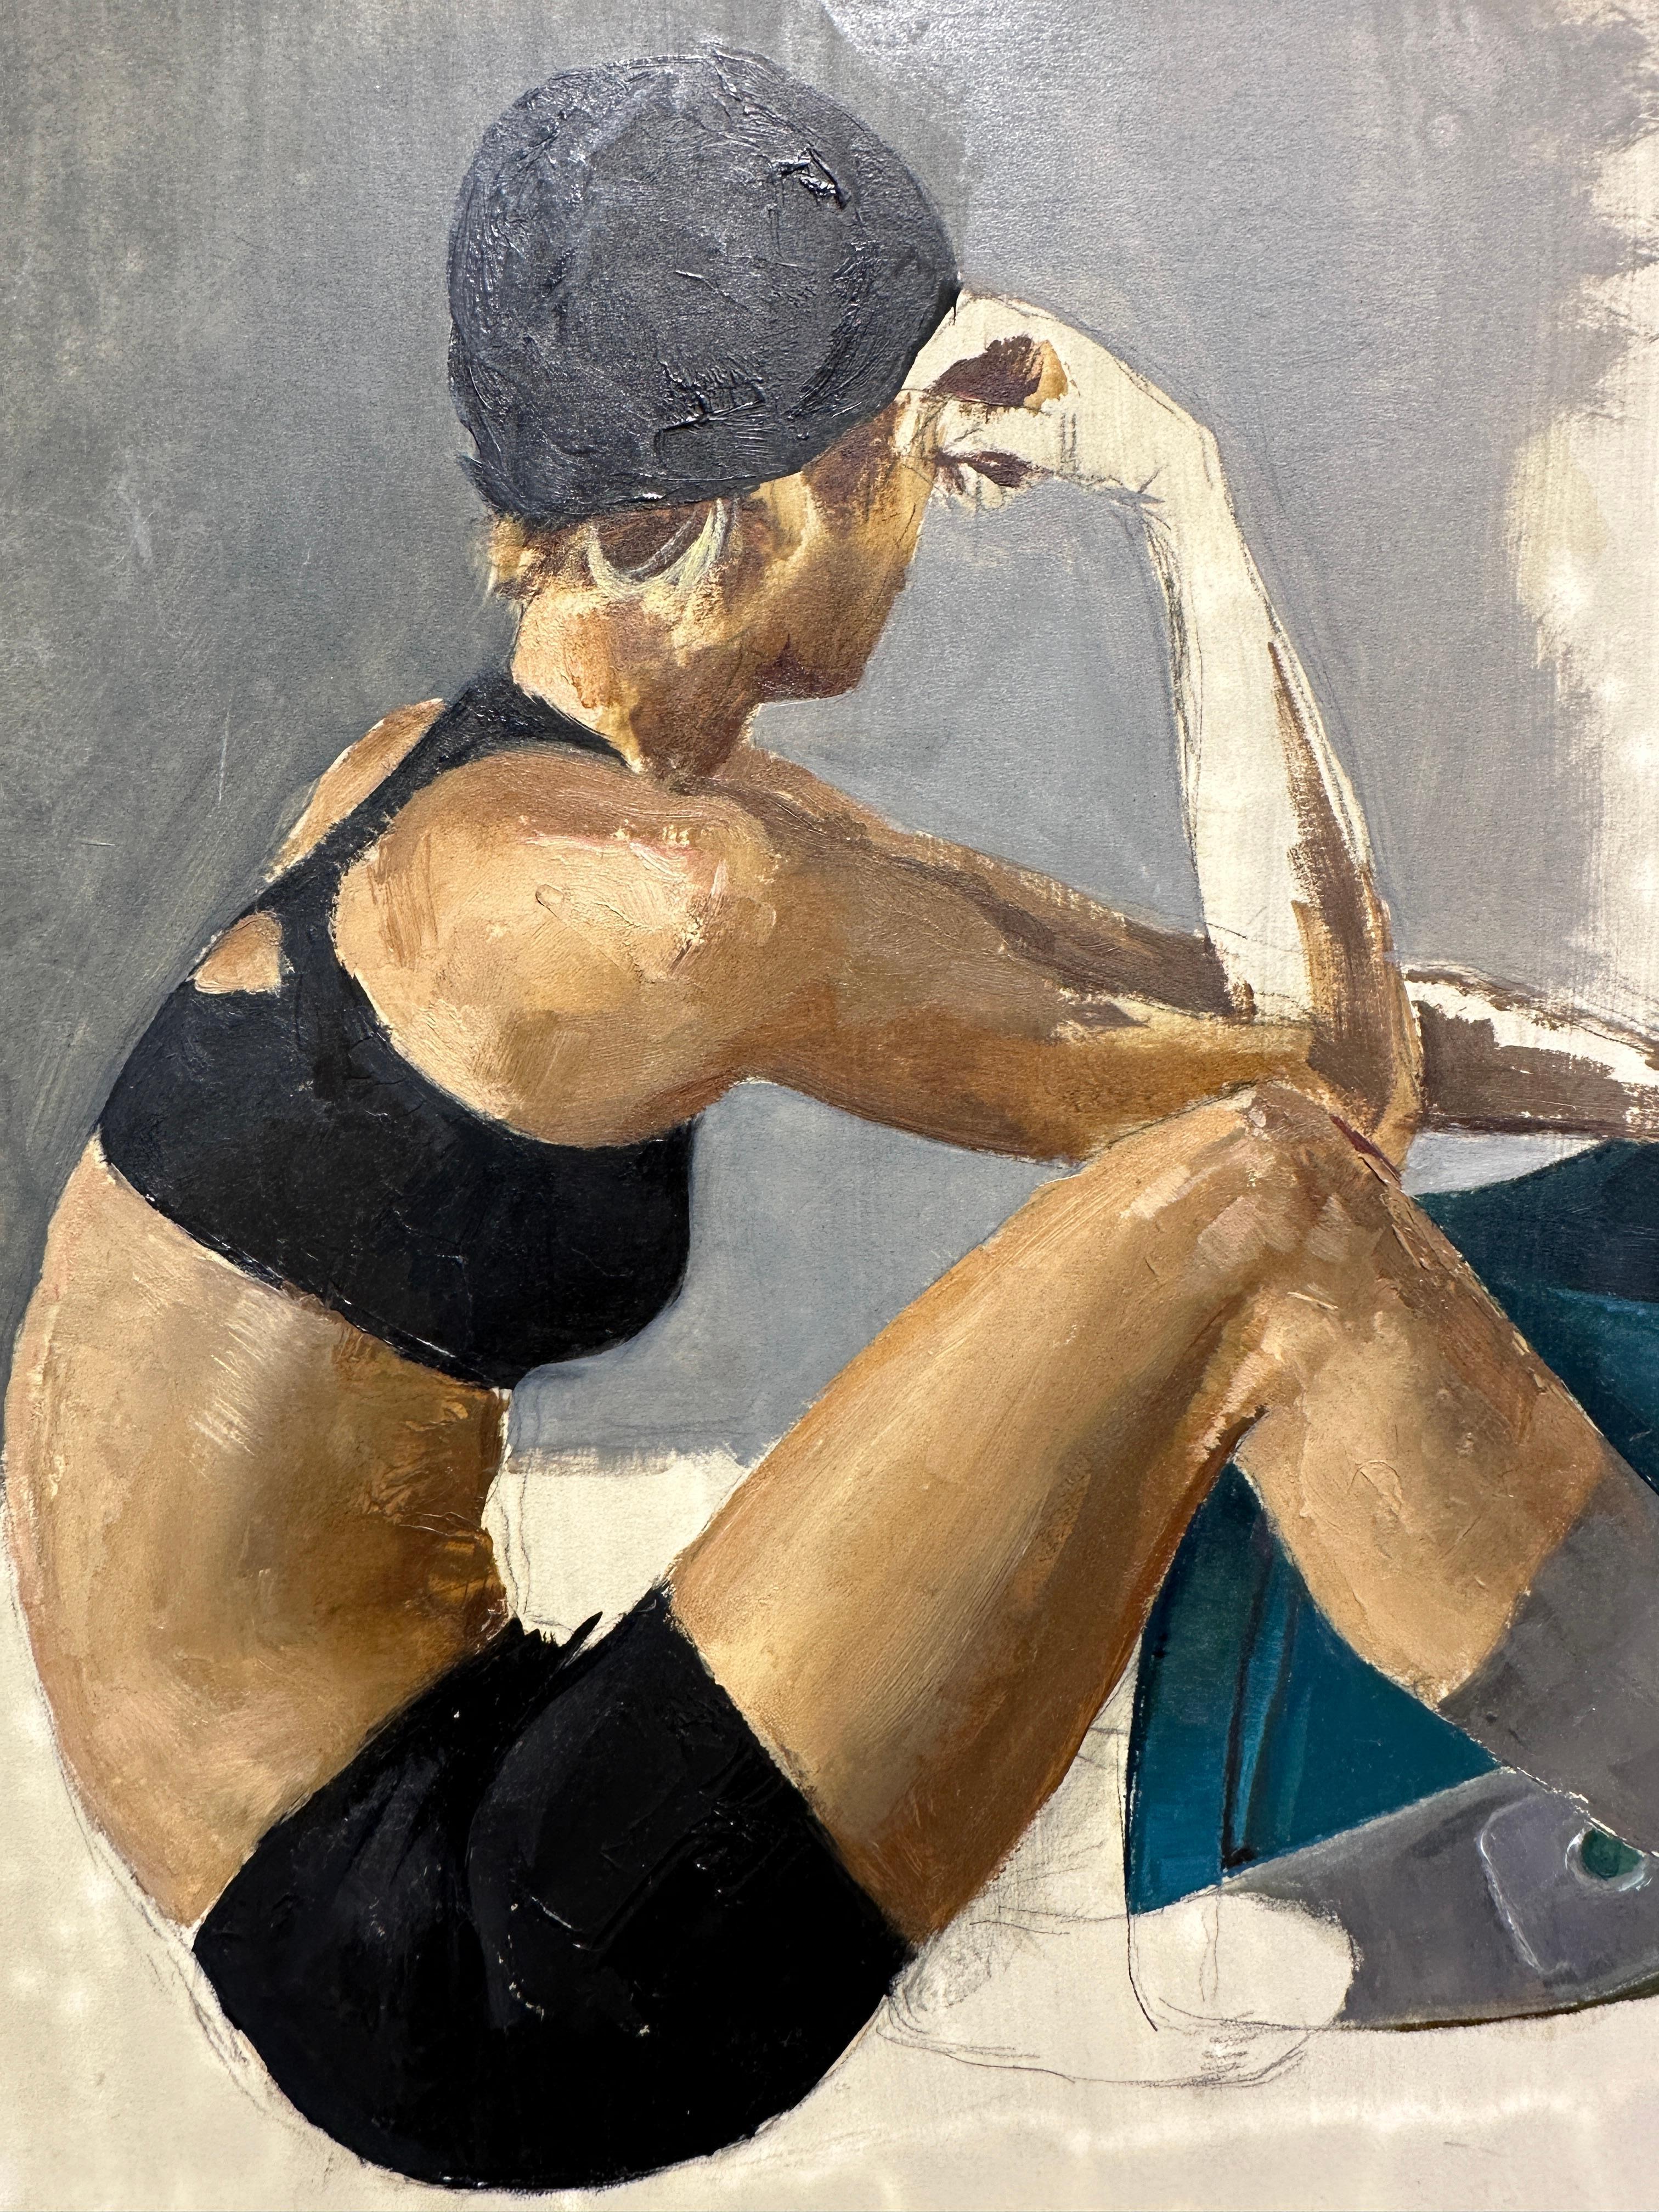 Kelsey Seated, Arm on Mac - Original Oil Painting, Study of a Dancer For Sale 1